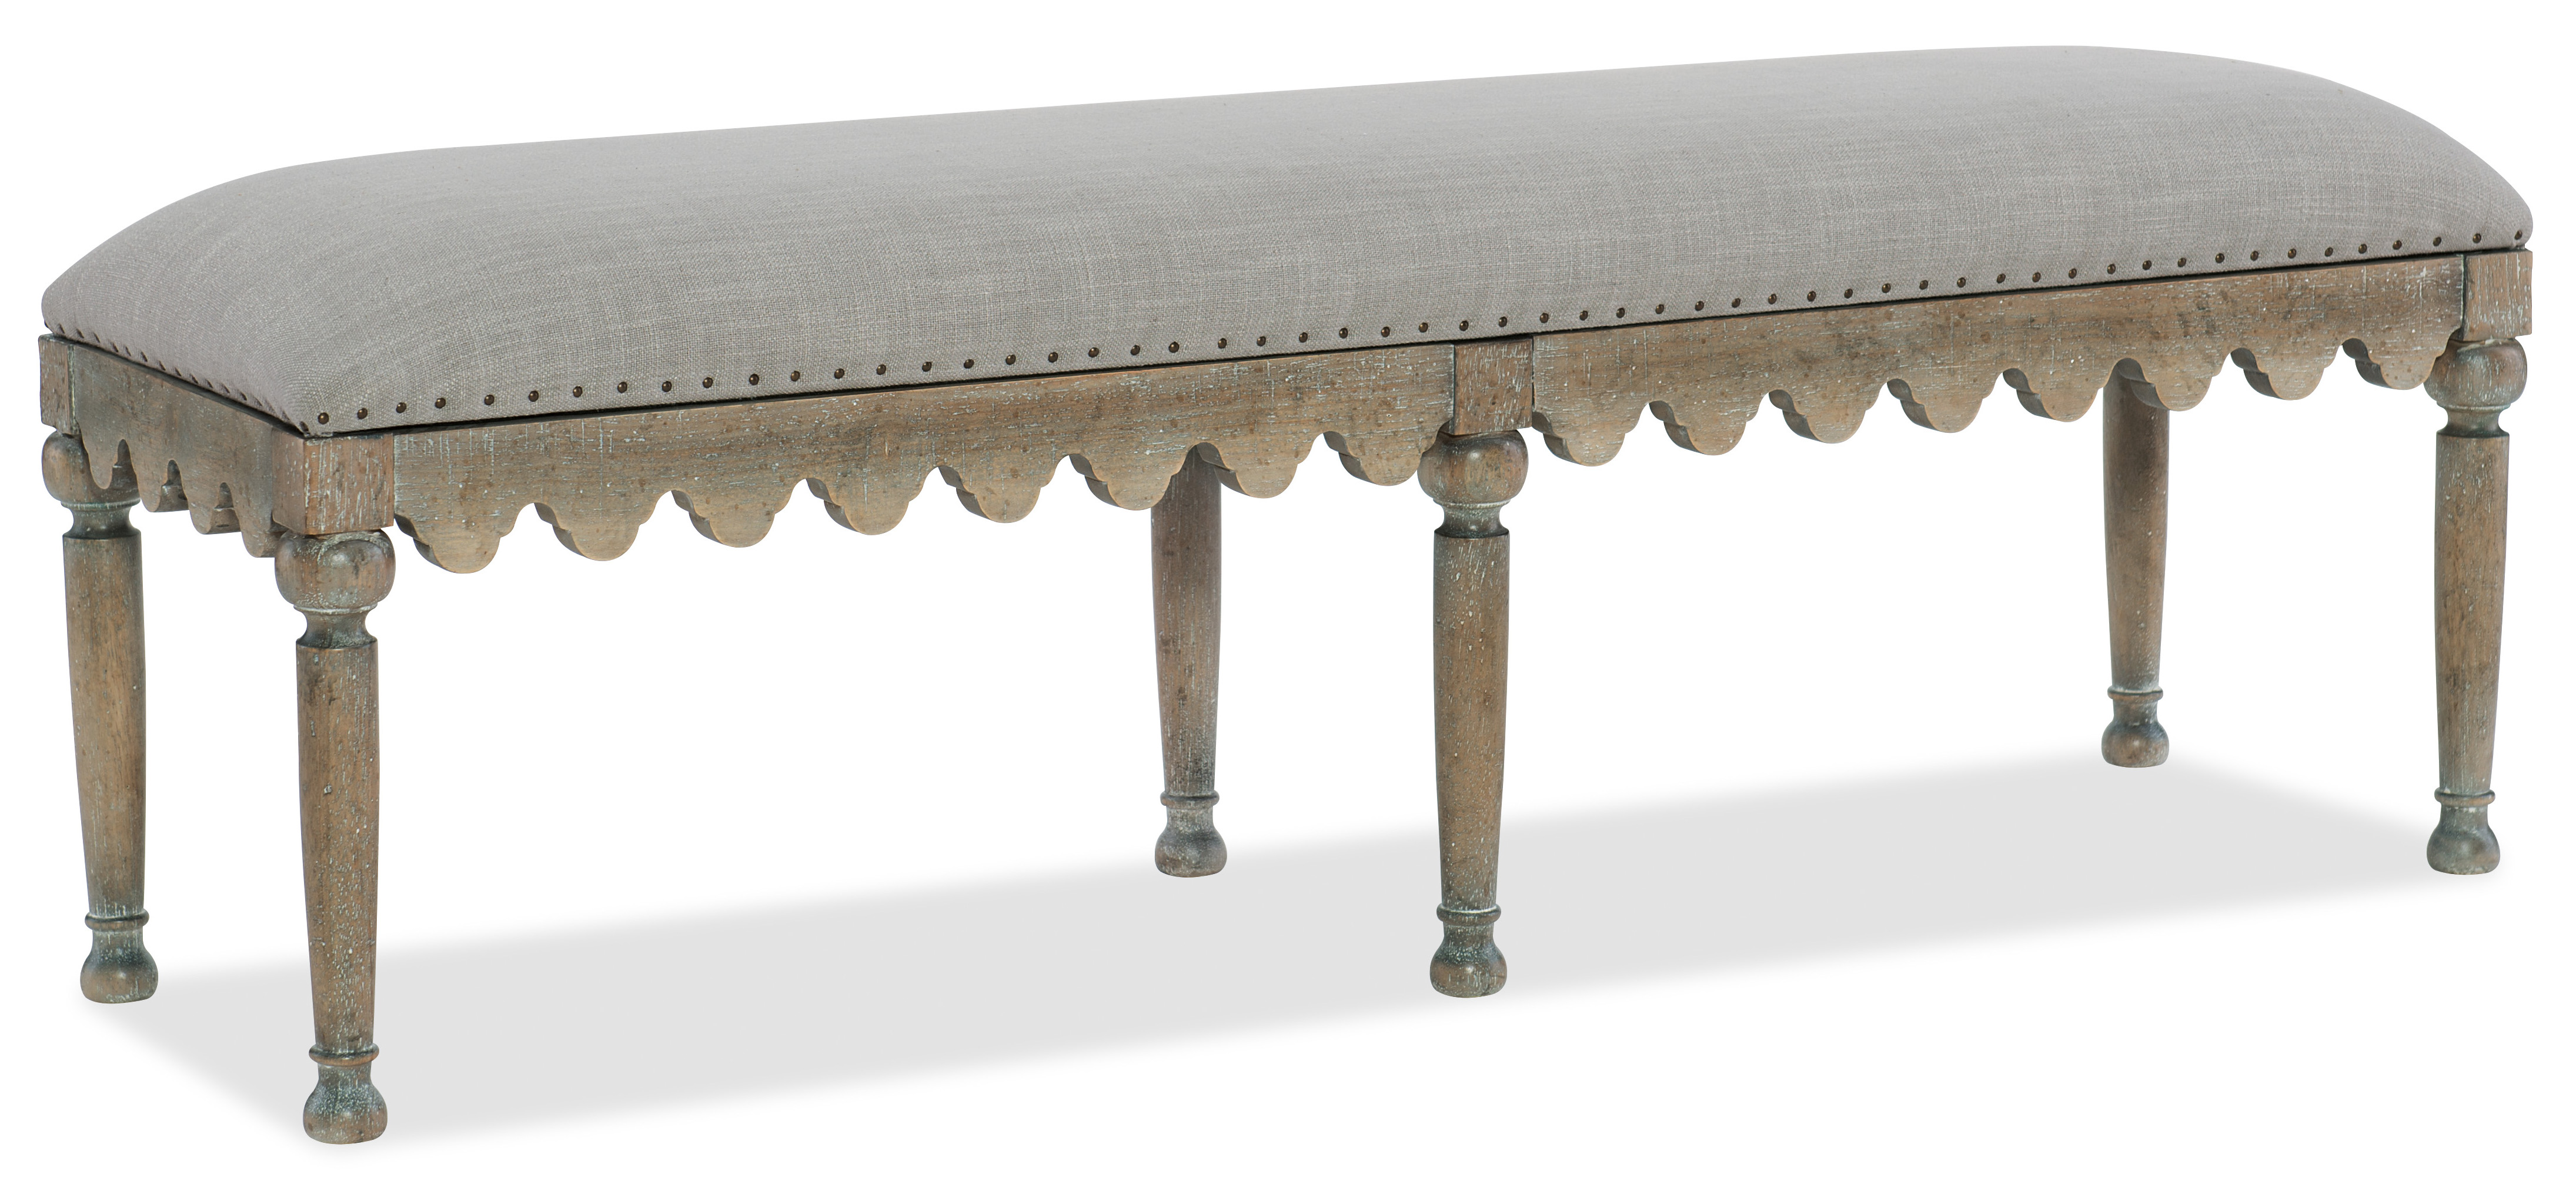 Picture of Madera Bed Bench